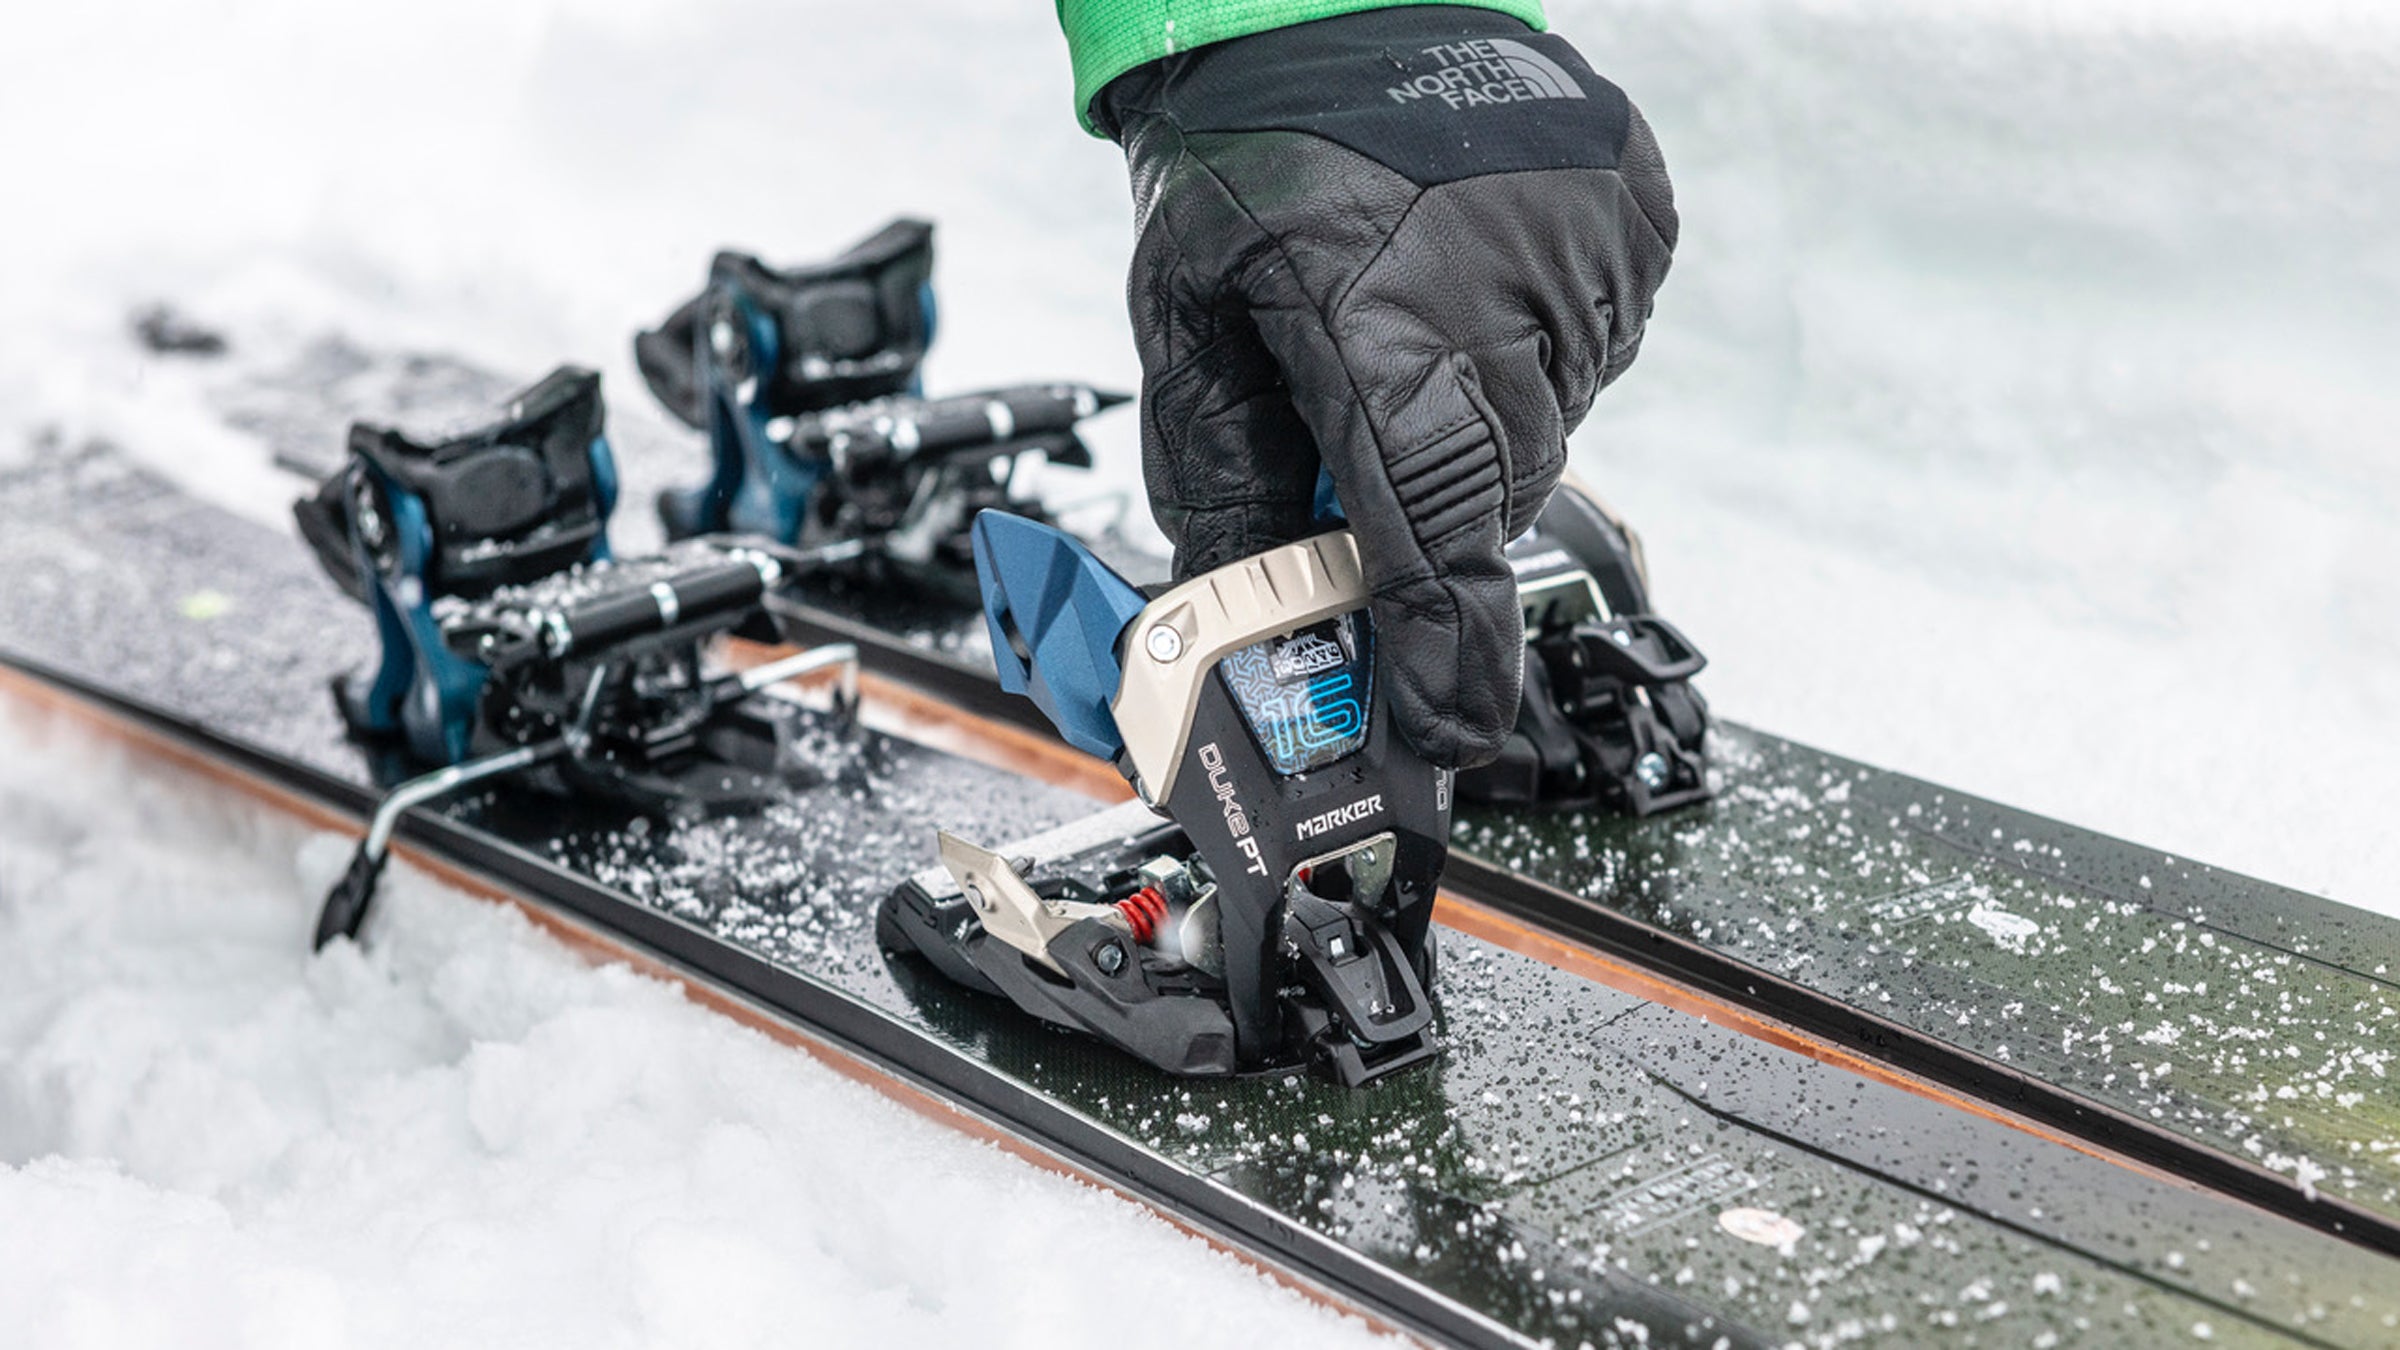 Marker's New Touring Binding Does (Almost) Everything